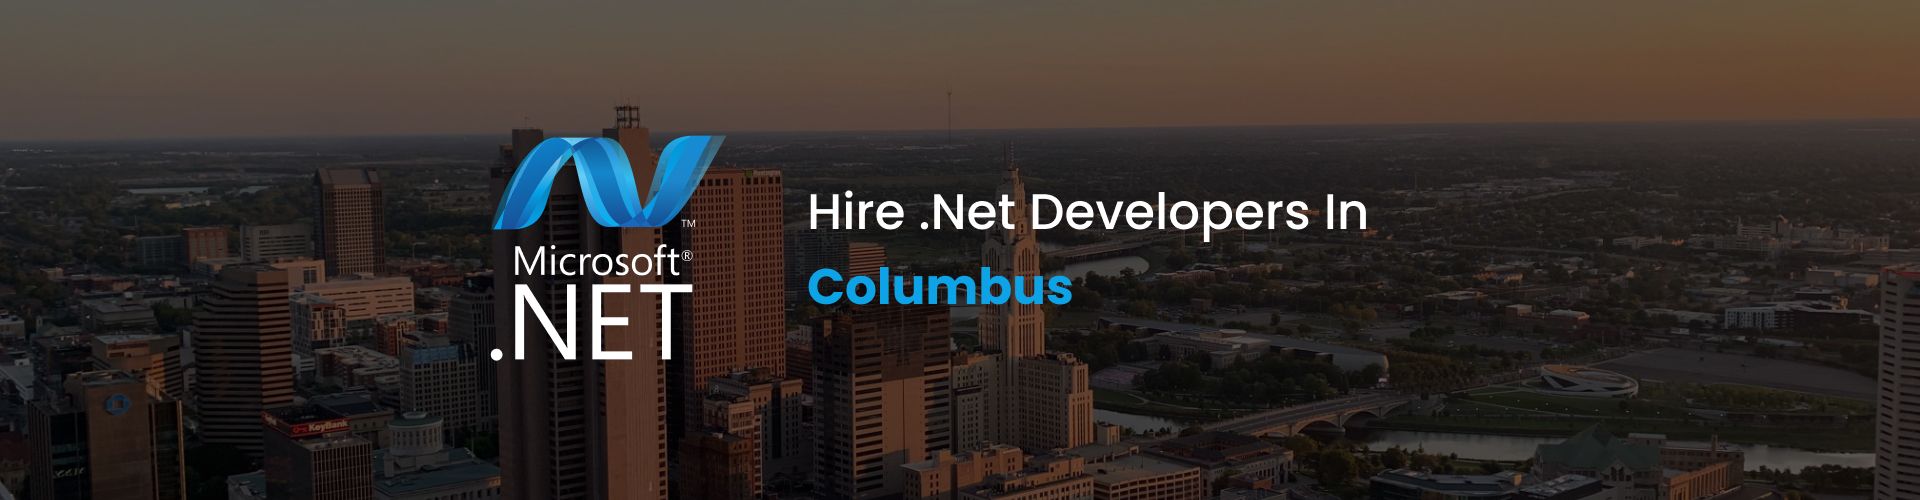 hire .net developers in columbus